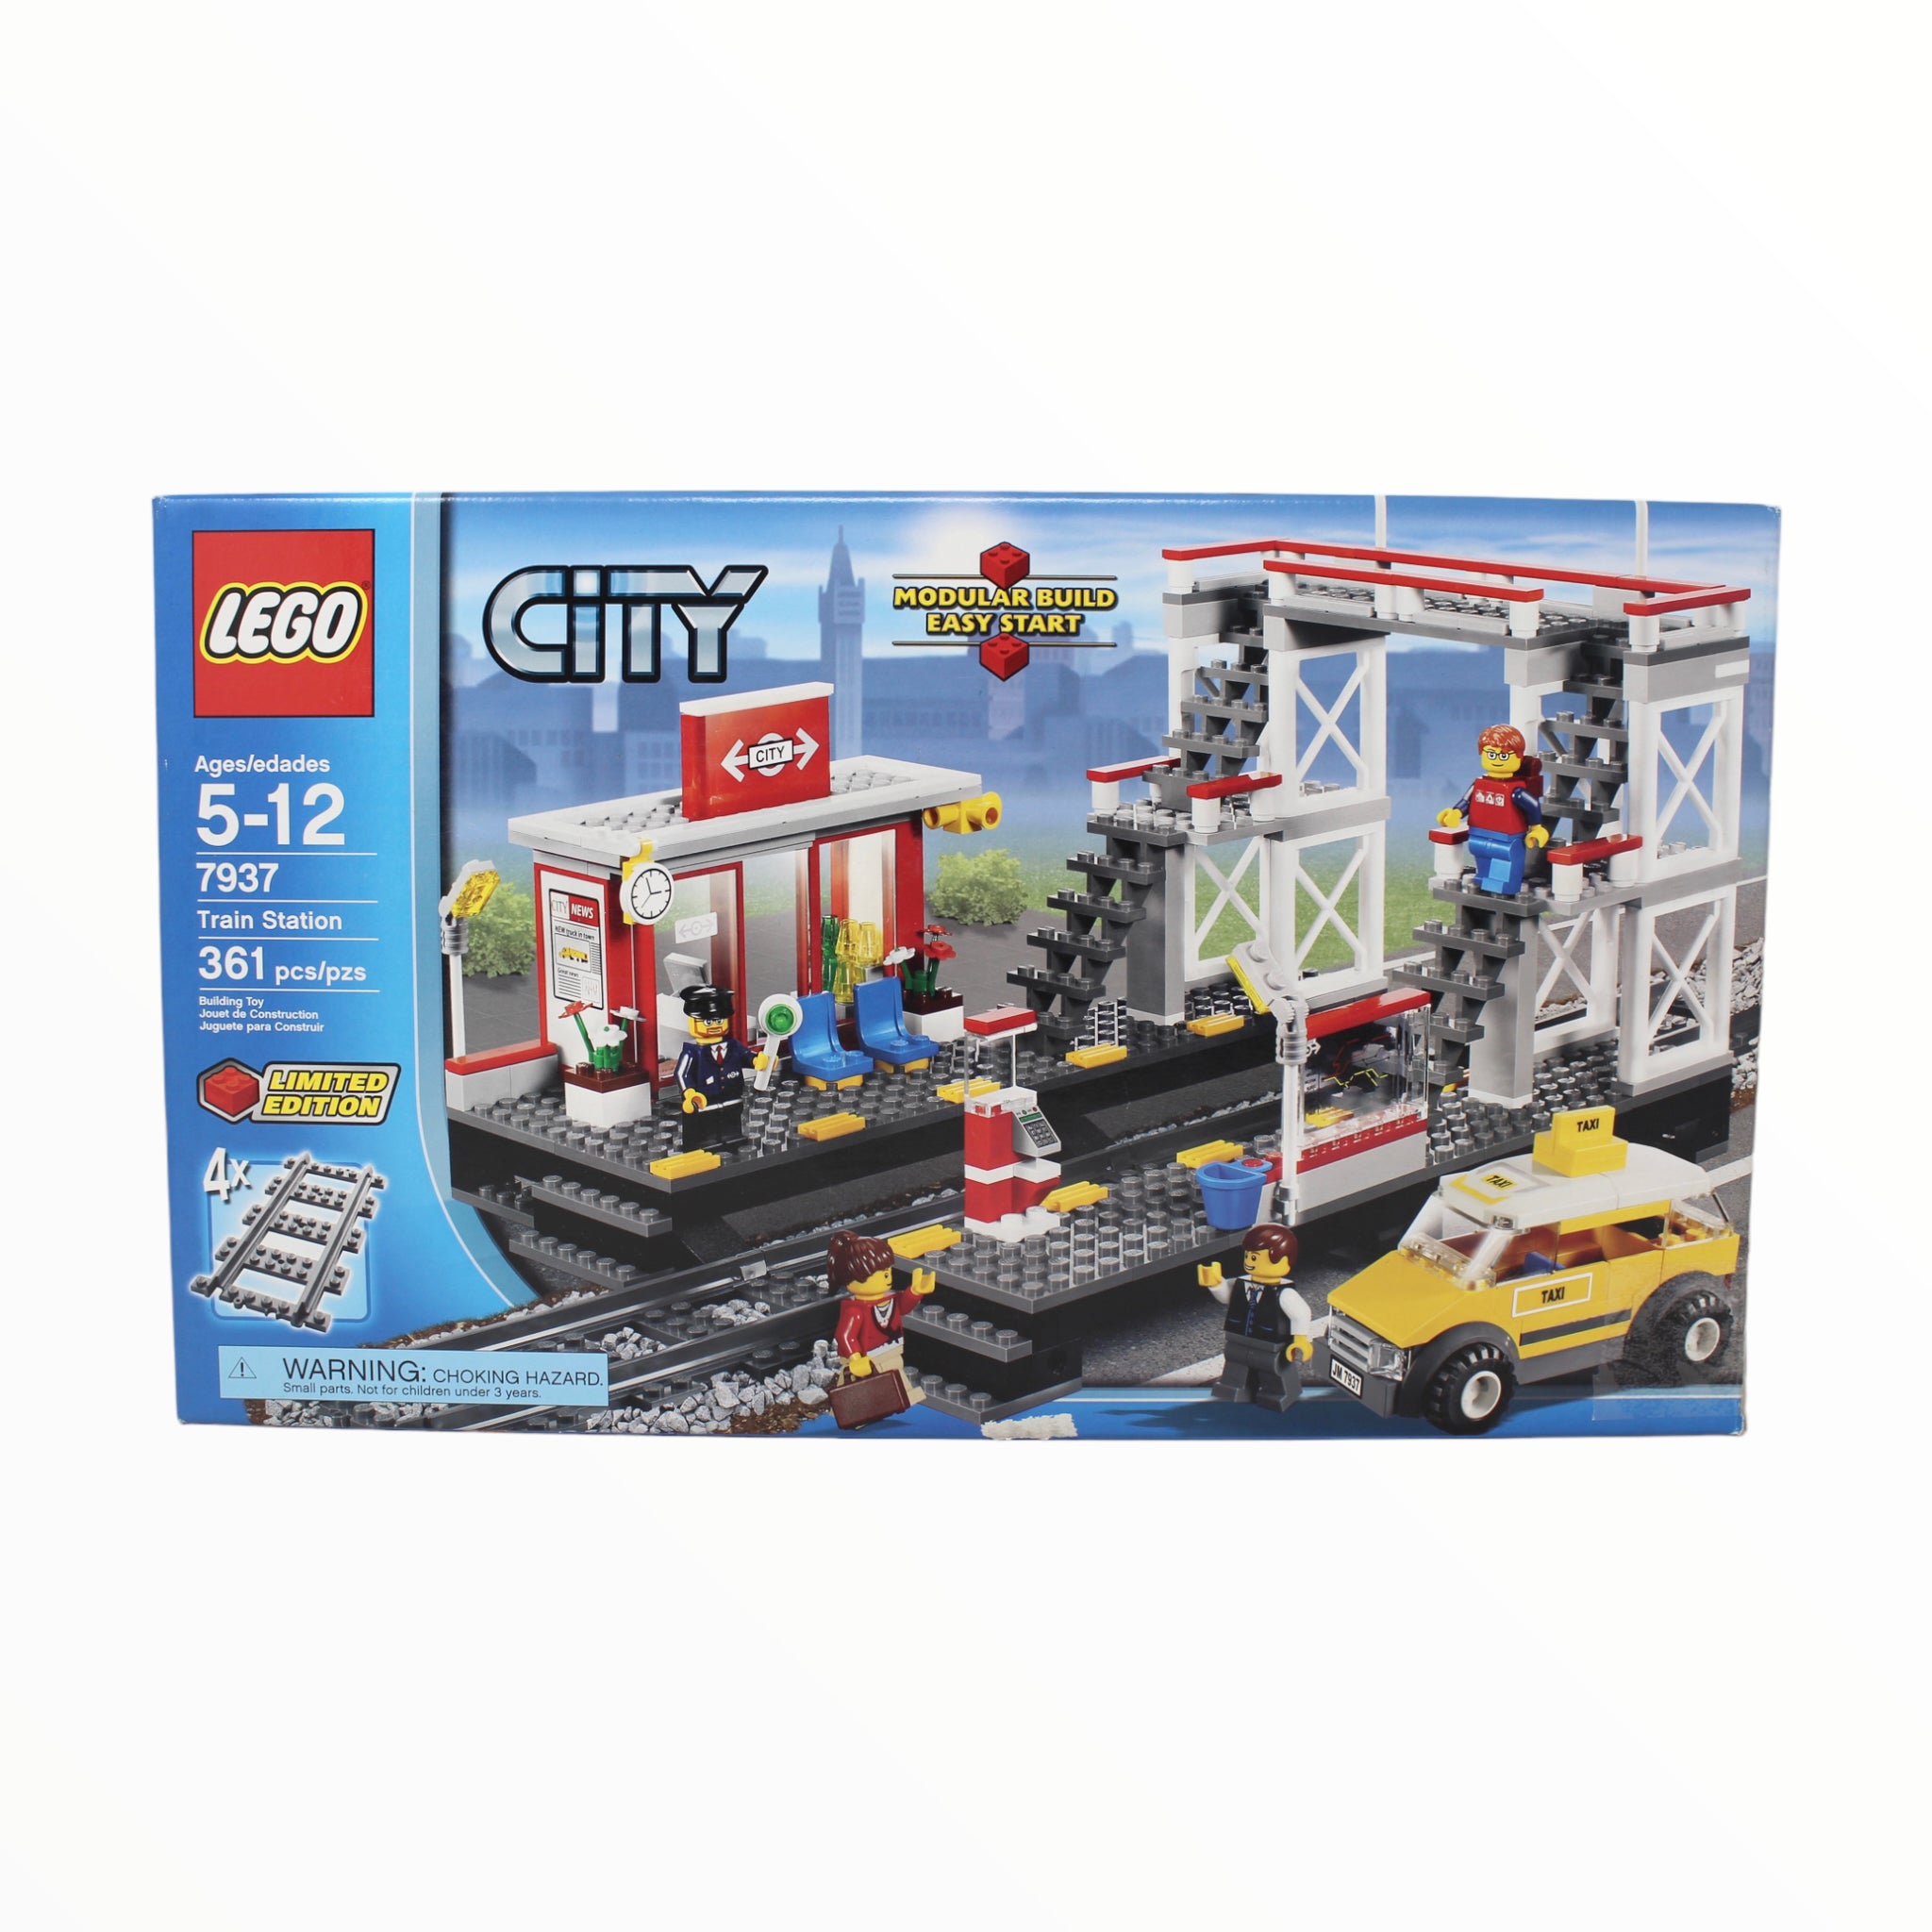 Certified Used Set 7937 City Train Station